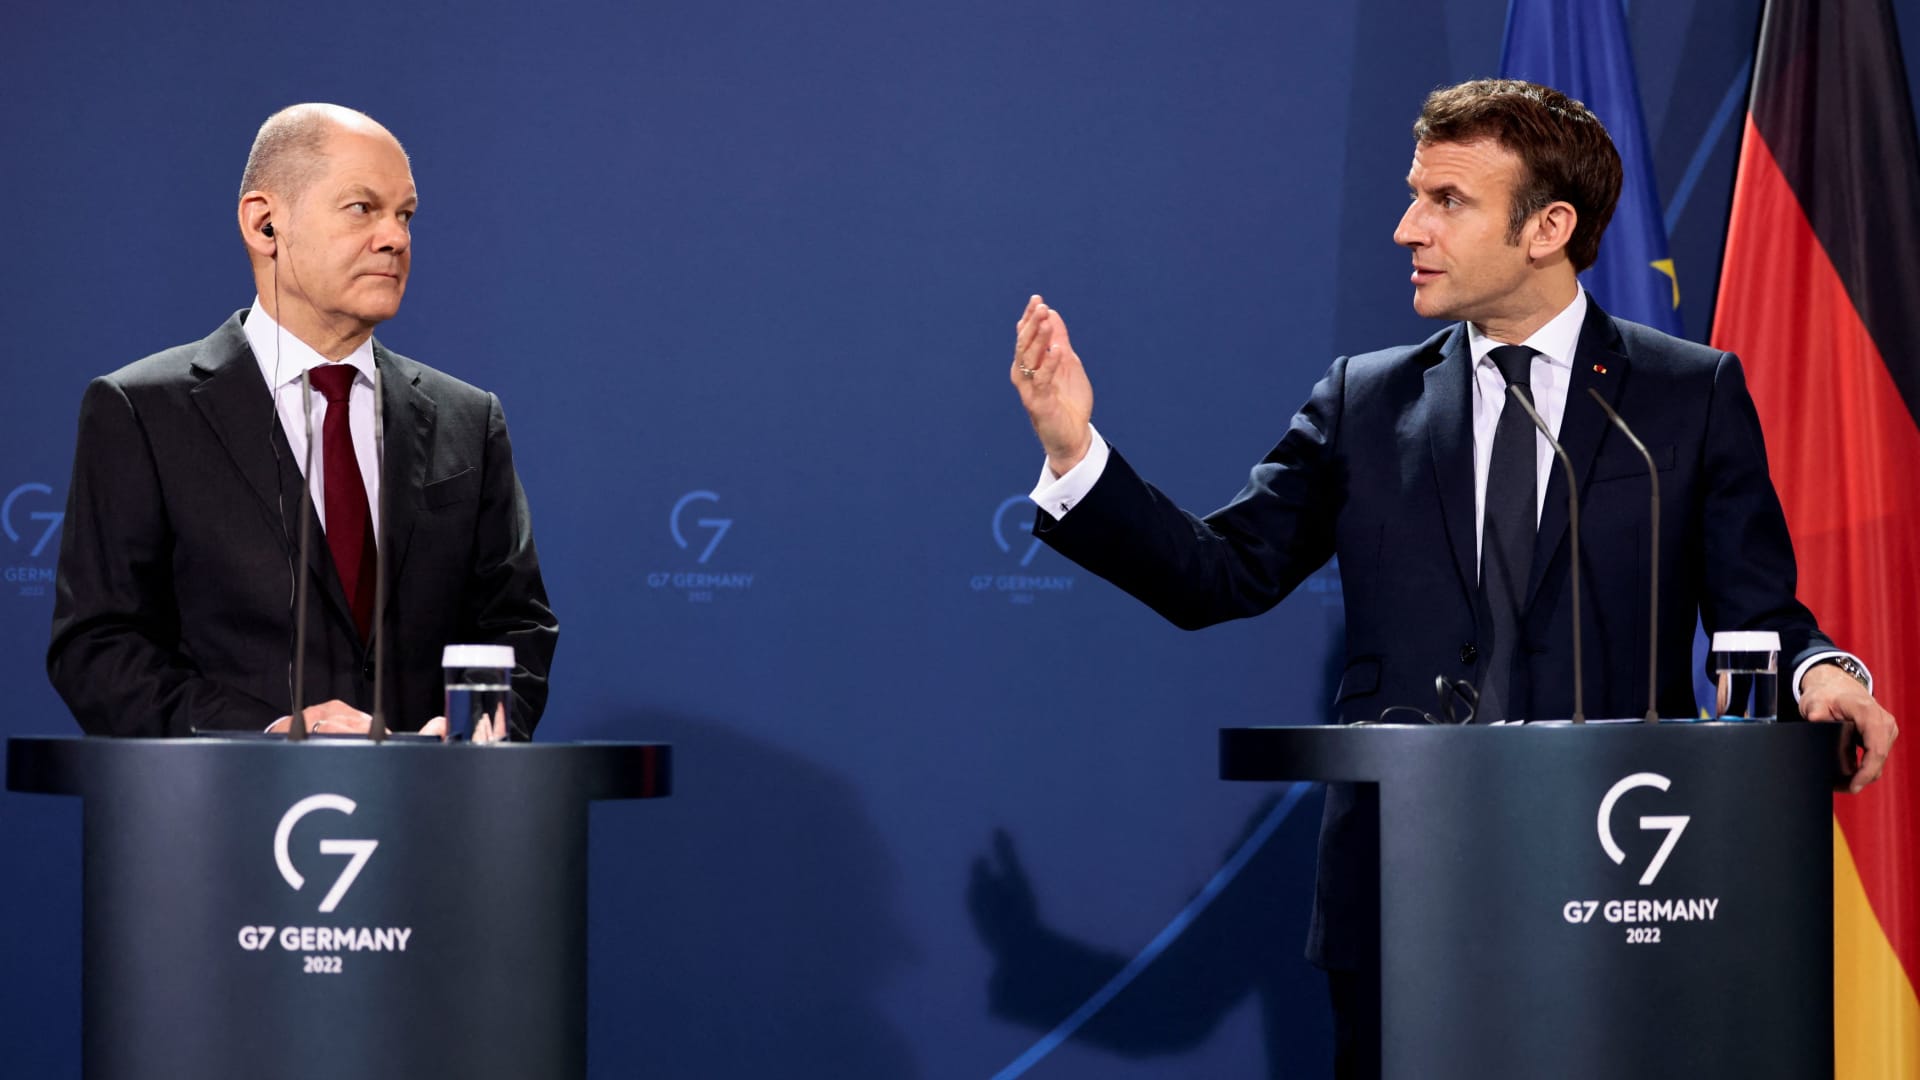 German Chancellor Olaf Scholz and French President Emmanuel Macron attend a news conference ahead of a Weimar Triangle meeting to discuss the ongoing Ukraine crisis, in Berlin, Germany, February 8, 2022.